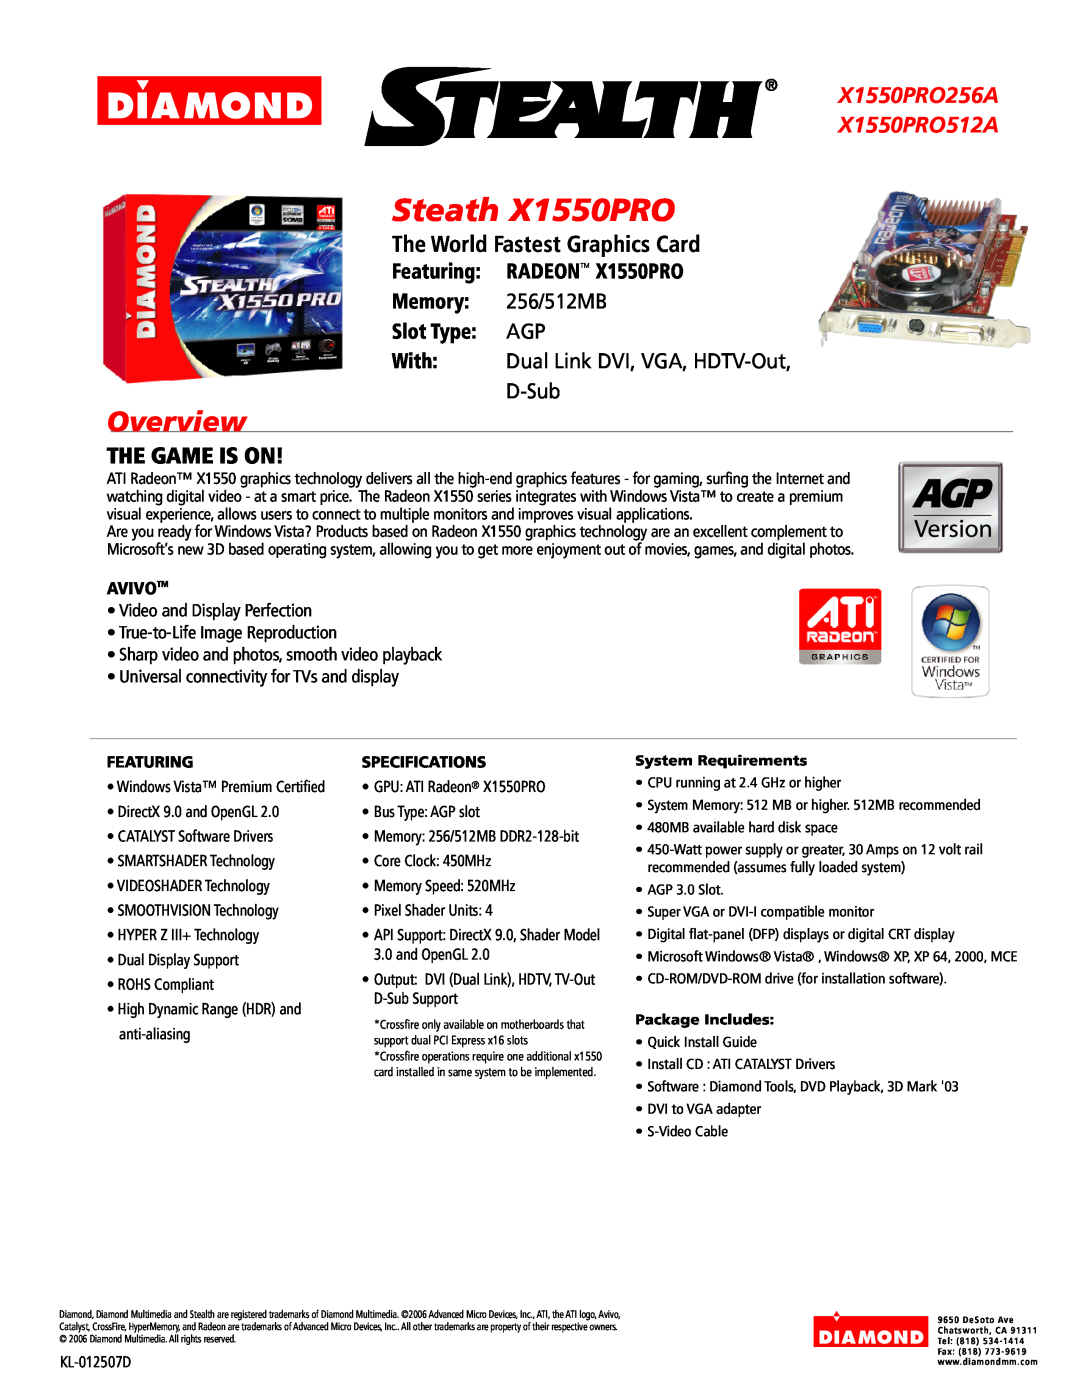 Diamond Multimedia specifications Steath X1550PRO, Overview, X1550PRO256A X1550PRO512A, The World Fastest Graphics Card 